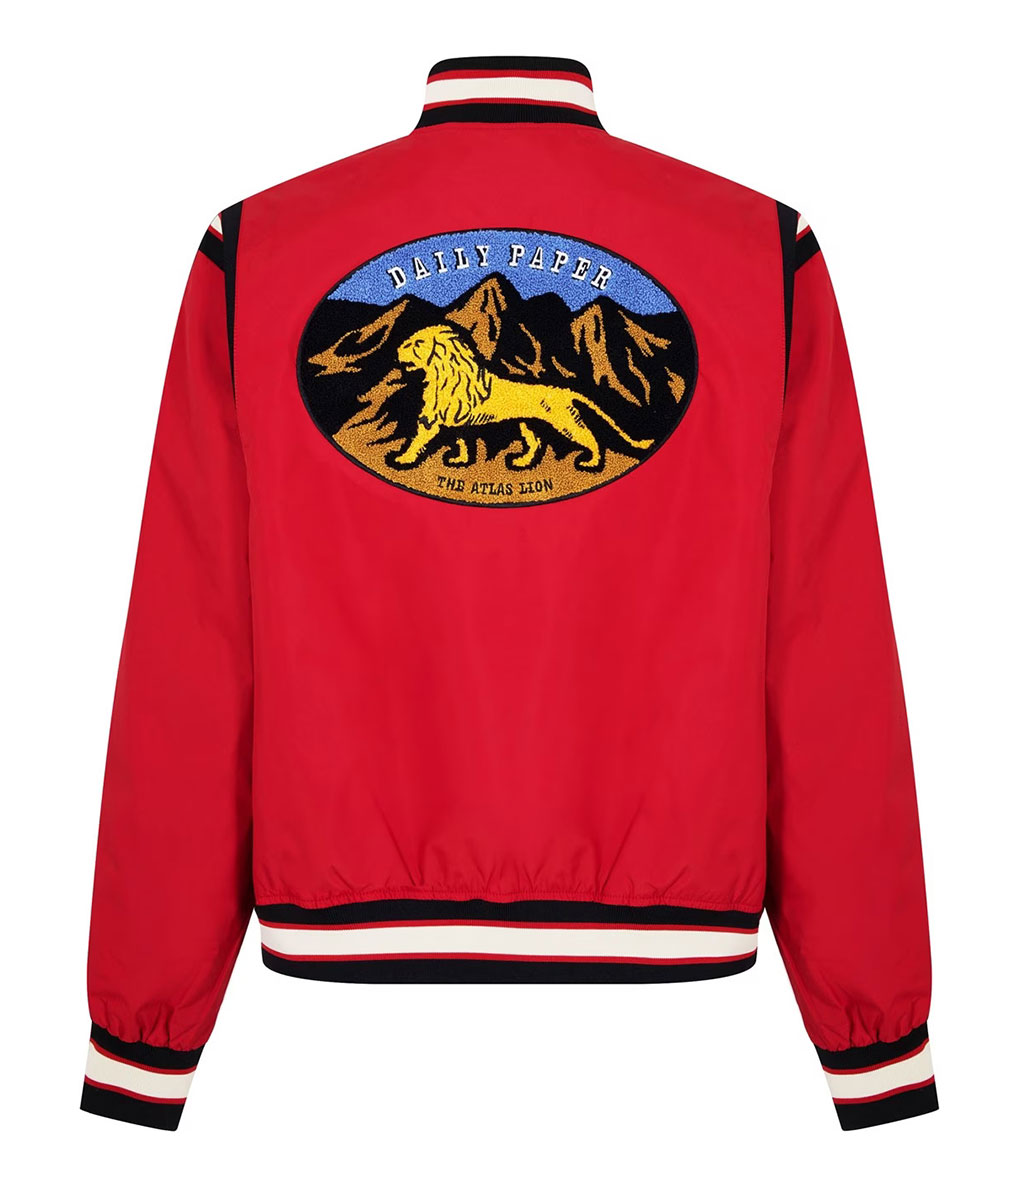 The Voice Chance the Rapper Red Varsity Jacket (2)